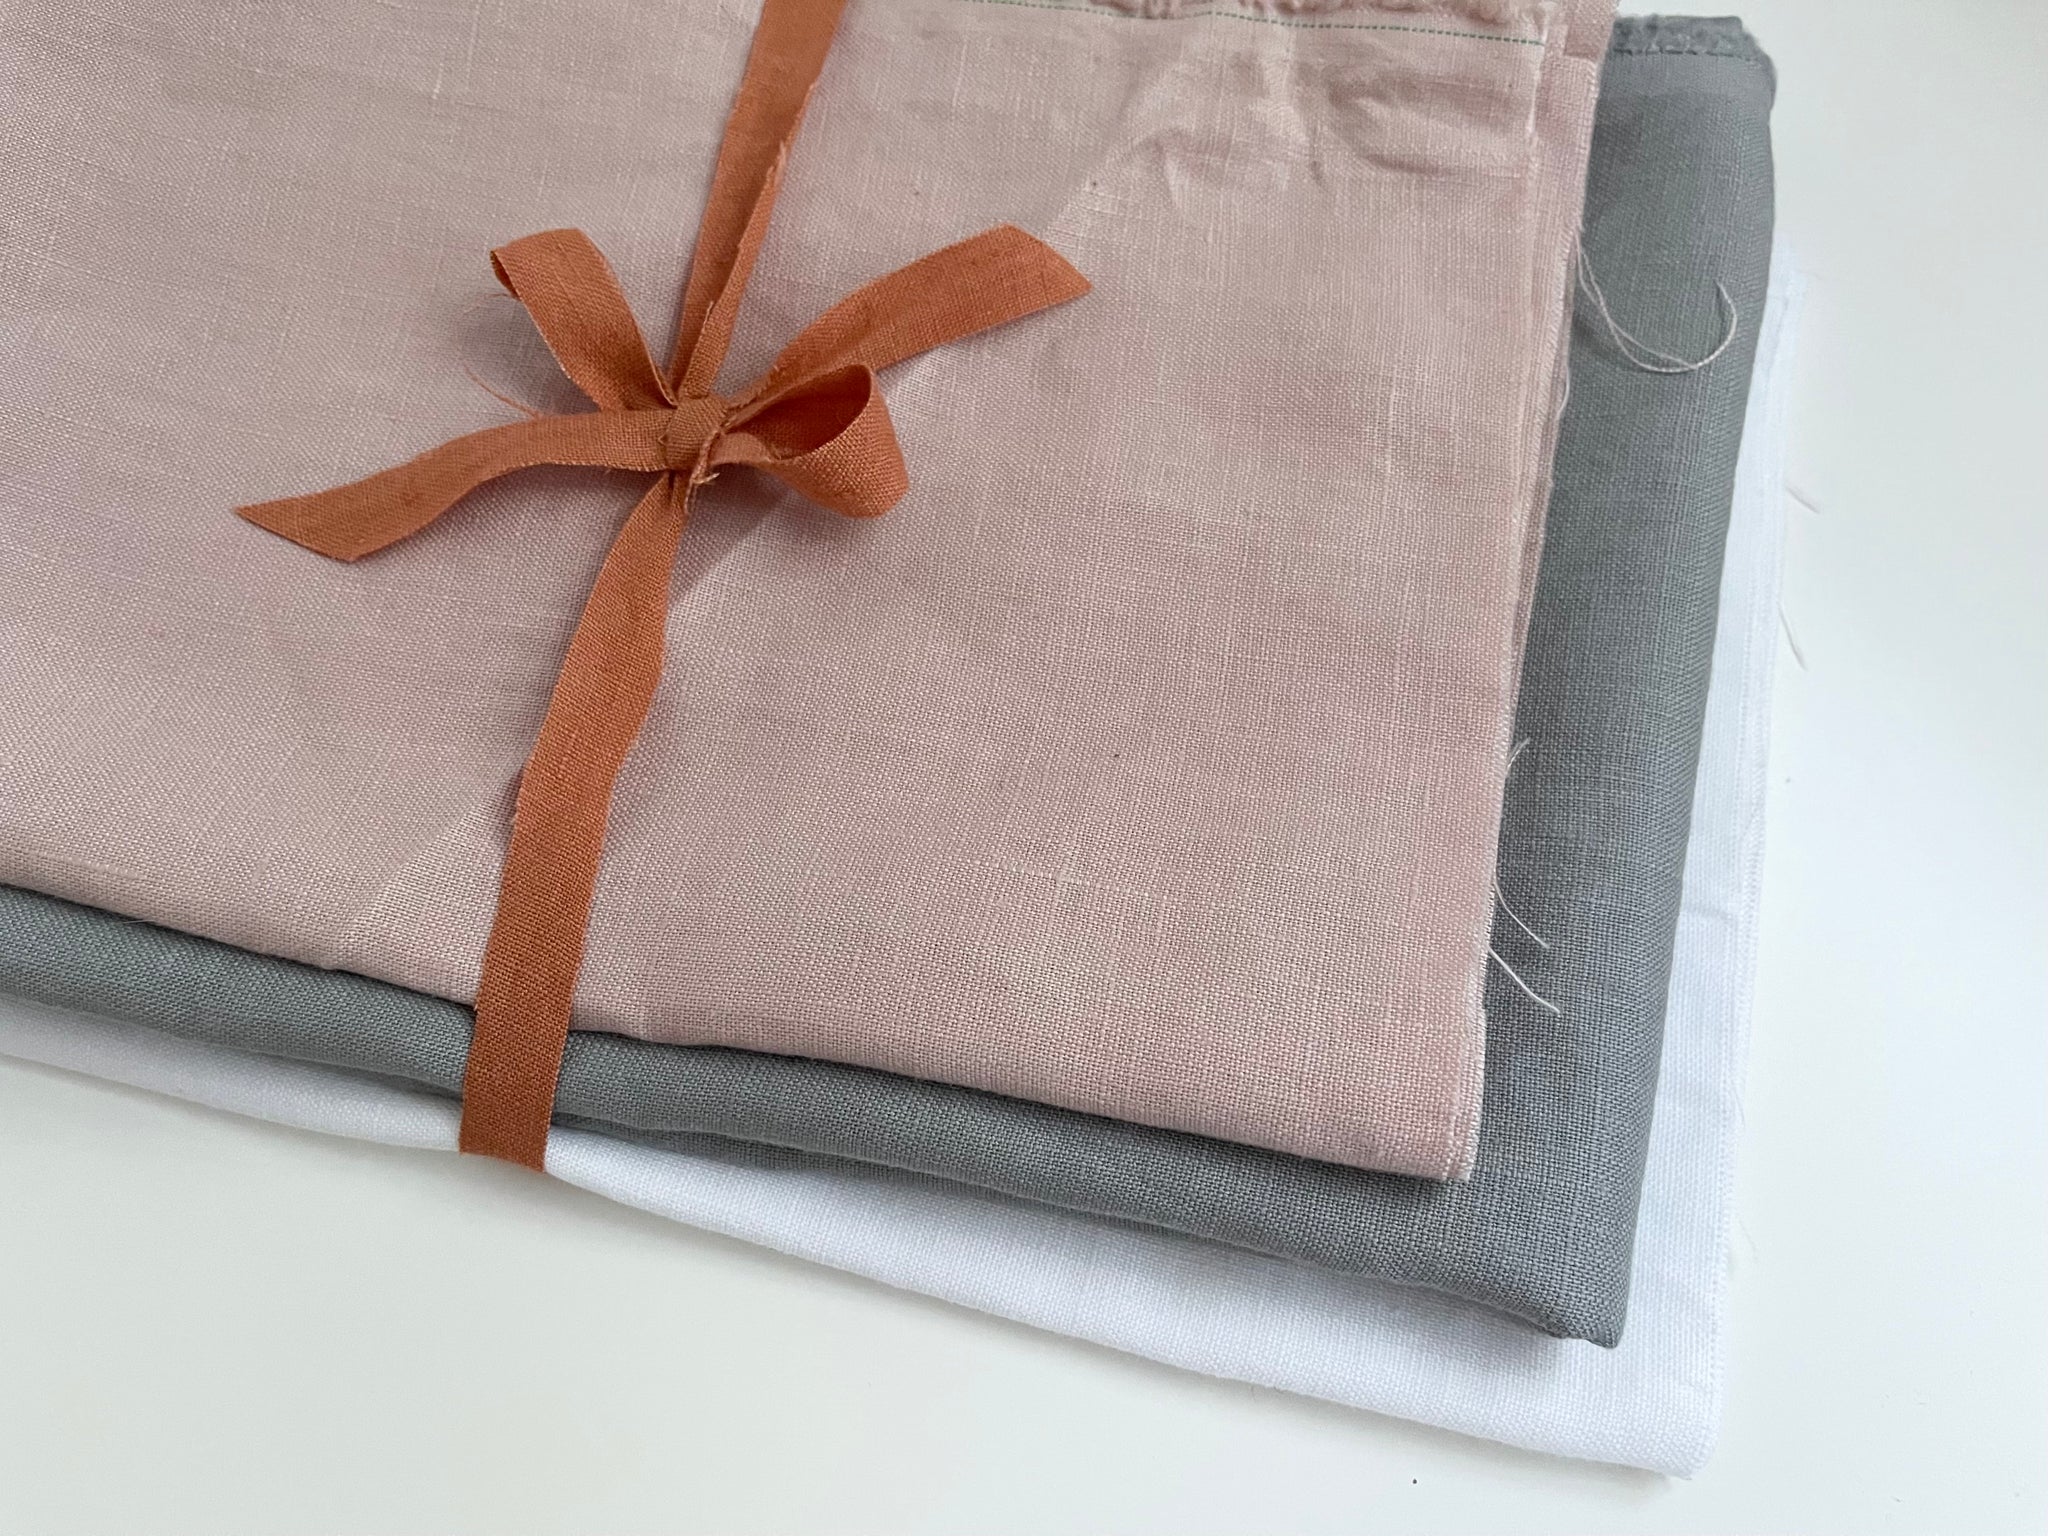 Linen Fabric Remnants - Pure White, Grey, Dusty Rose